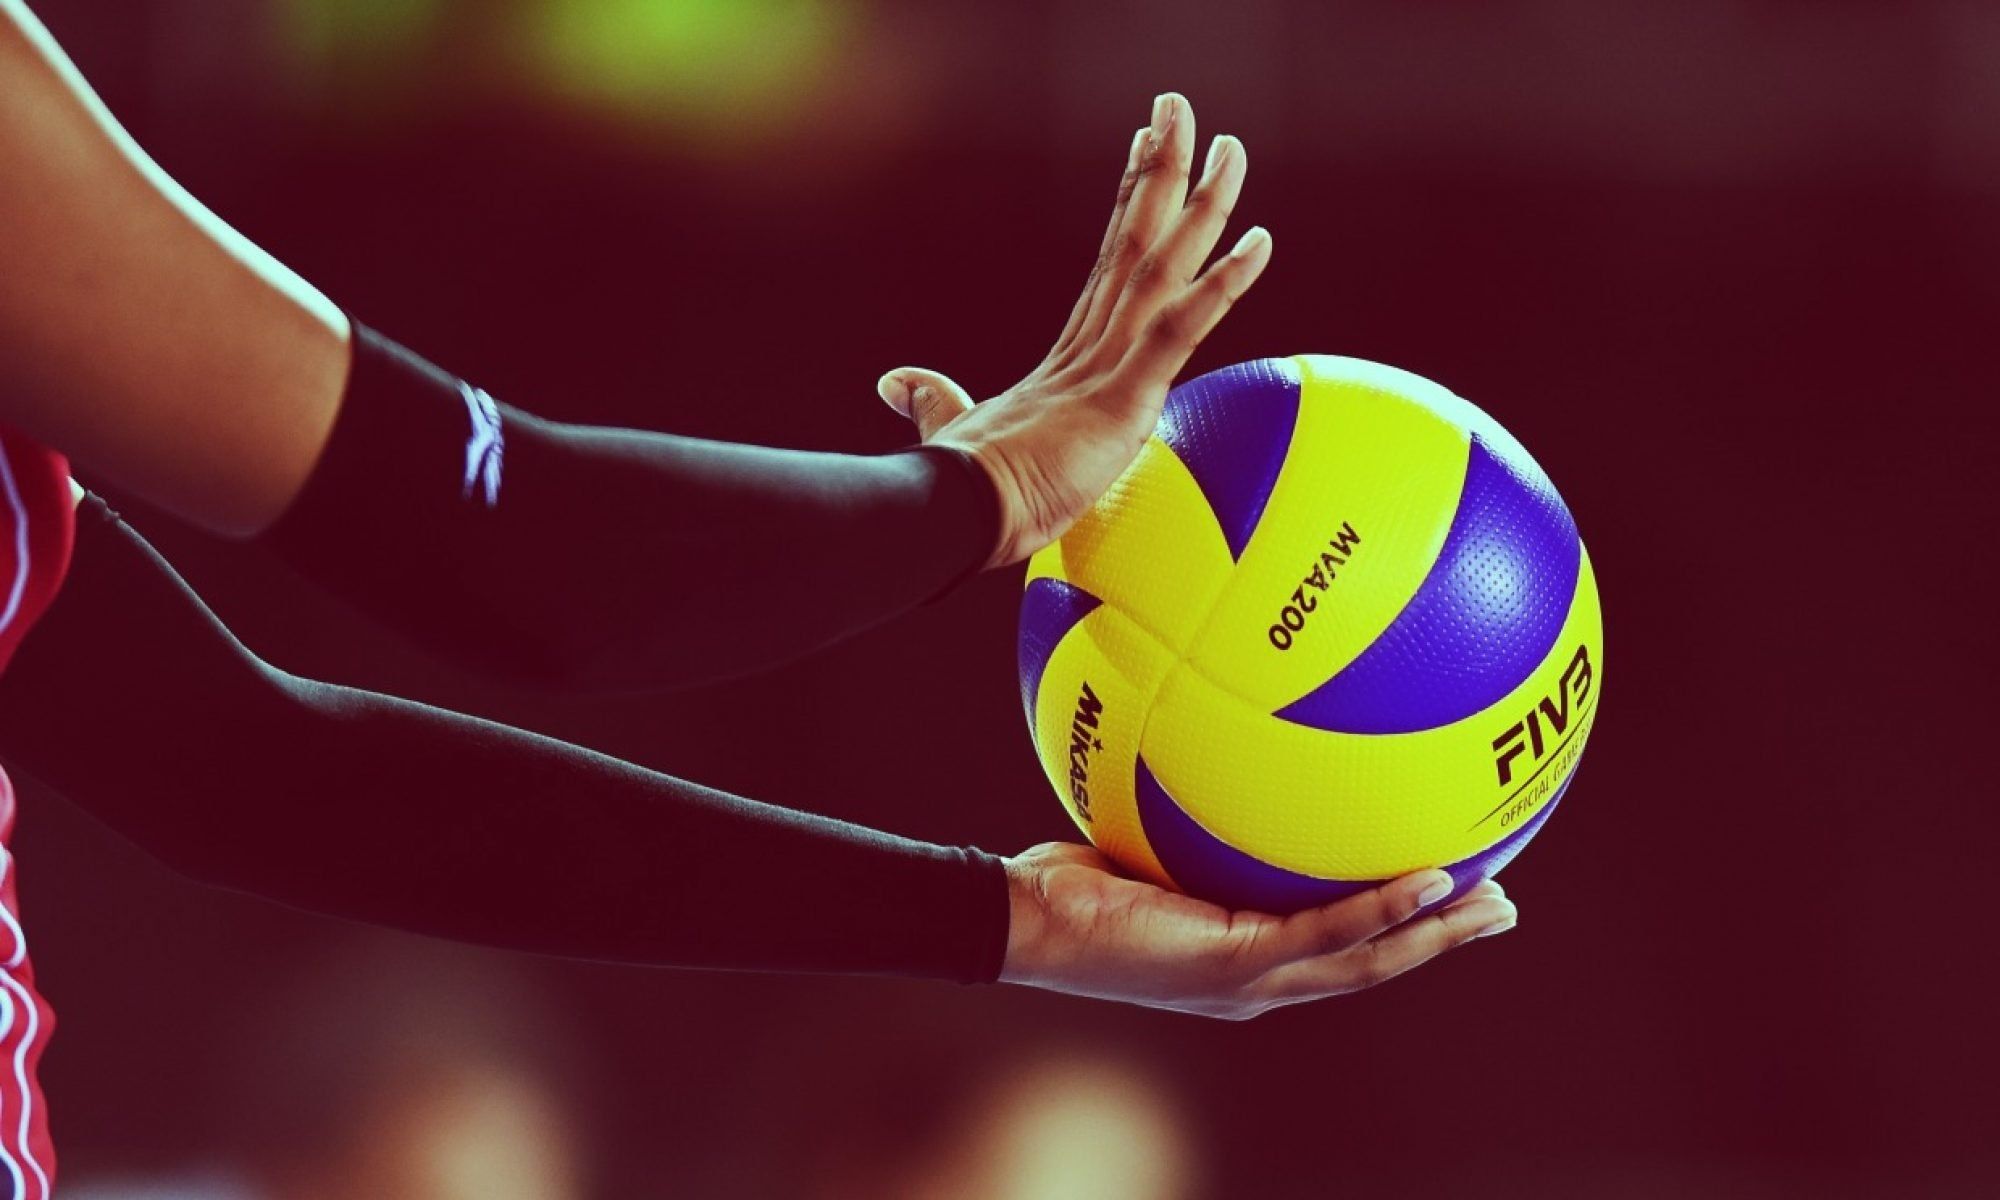 A person holding onto the ball with their hands - Volleyball